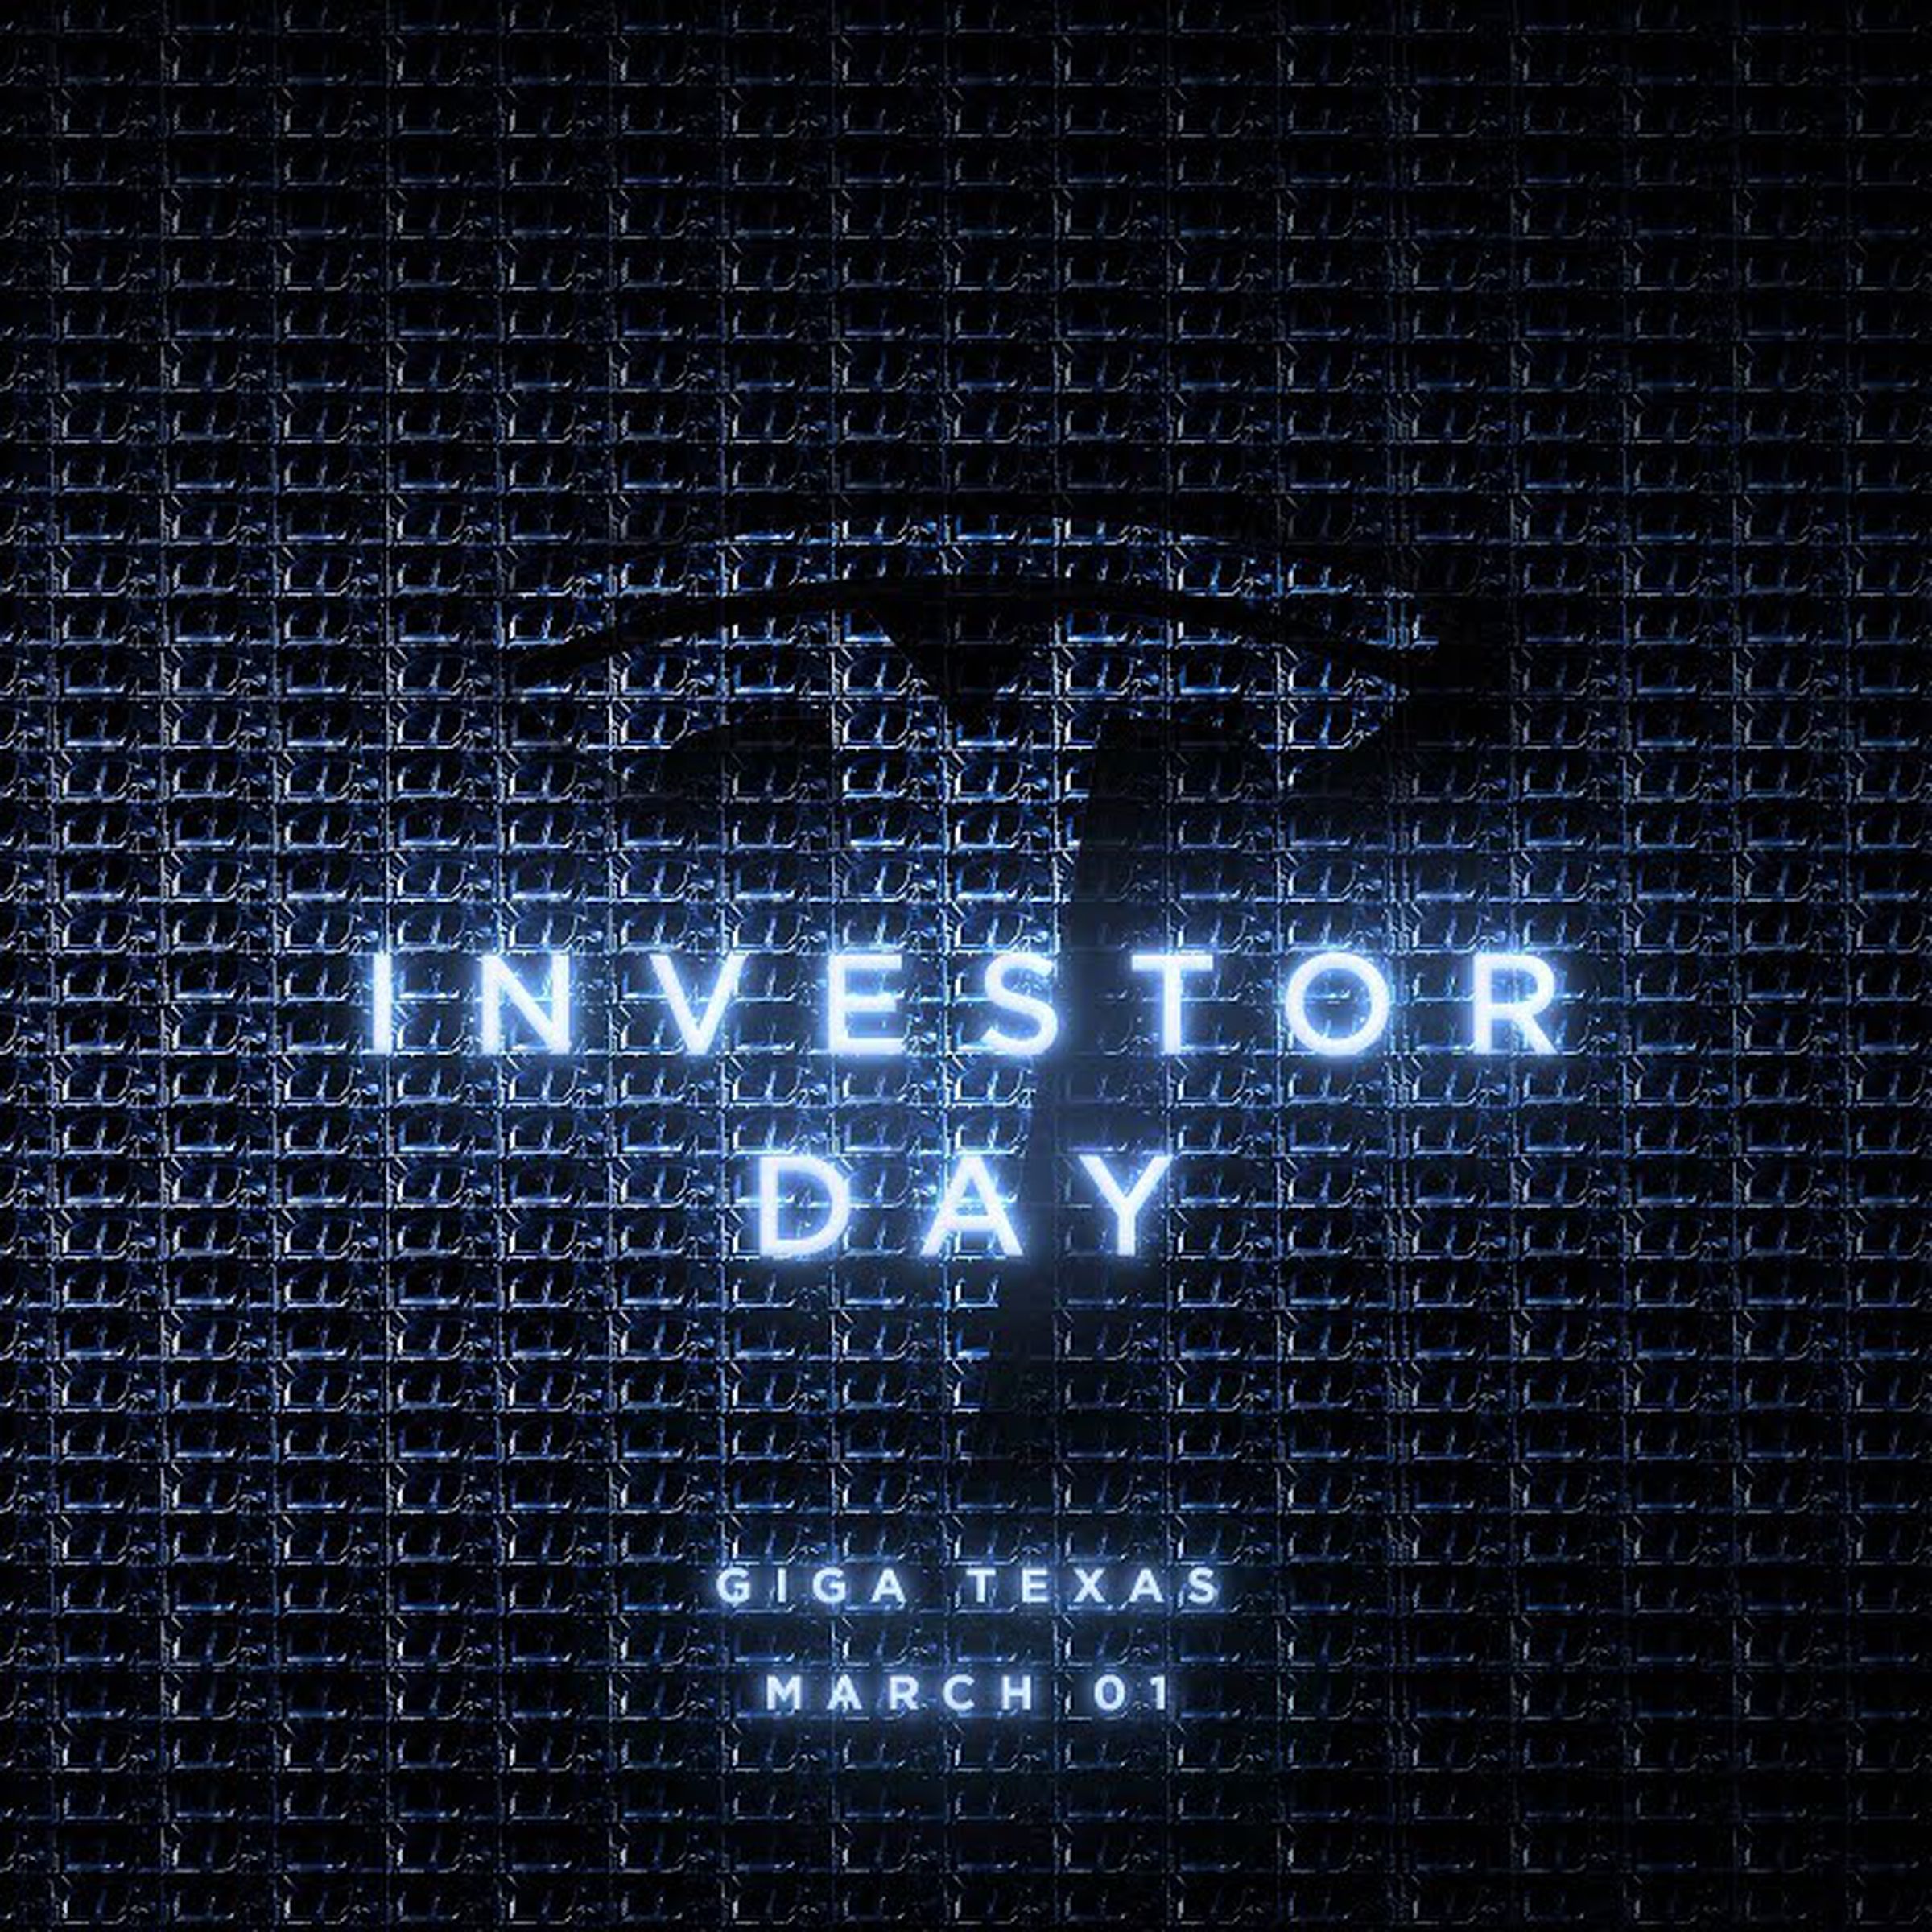 Tesla investor day splash image, say Giga Texas and March 01 date.